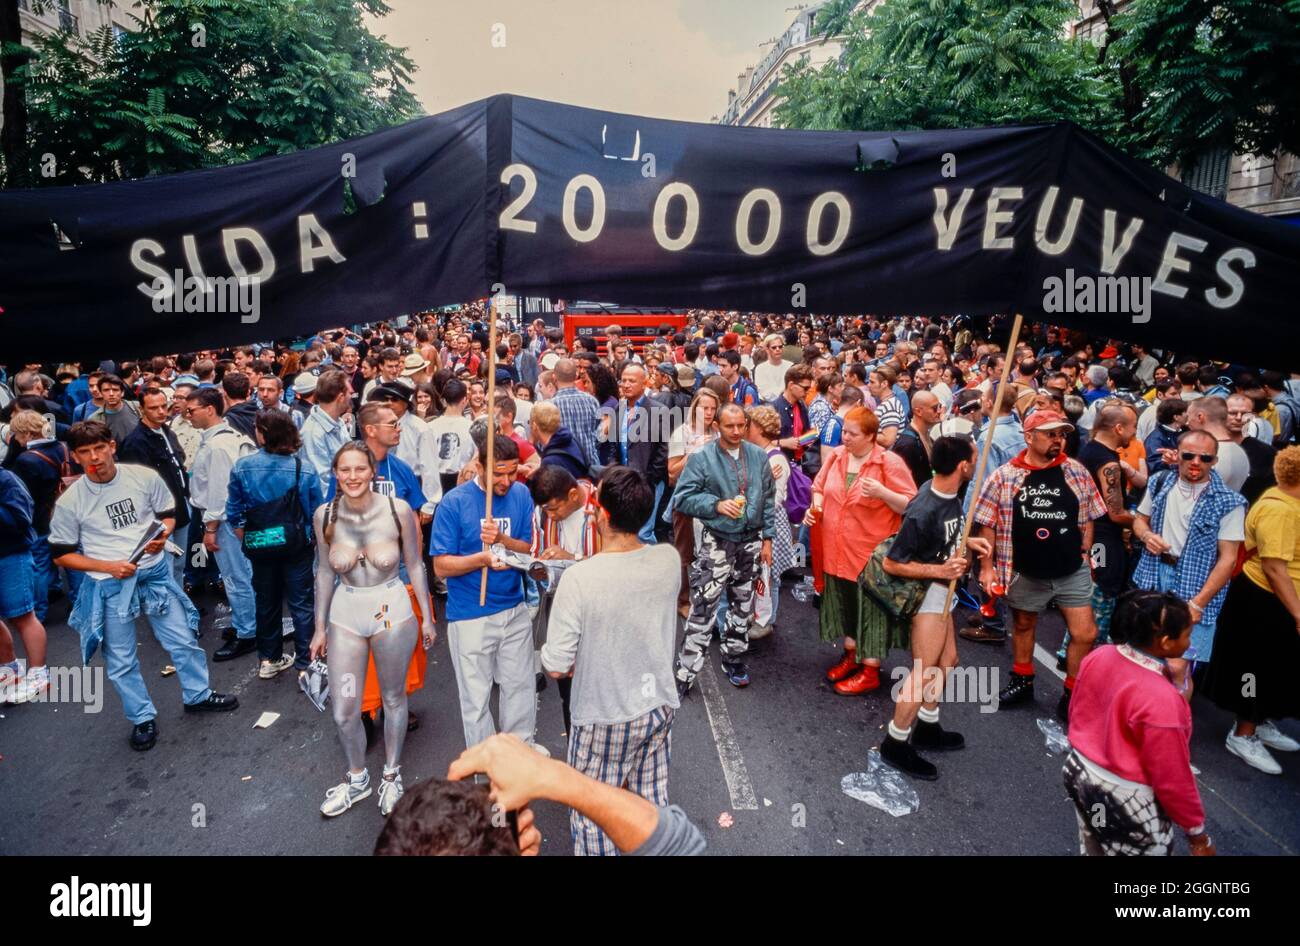 Large Crowd of People, Front, AIDS Activists of Act Up PAris Demonstrating on Street, 'Gay Pride' 1996, holding protest banner 'AIDS: 20,000 Widows' young activism homosexuals, gay protest, public health challenges Stock Photo